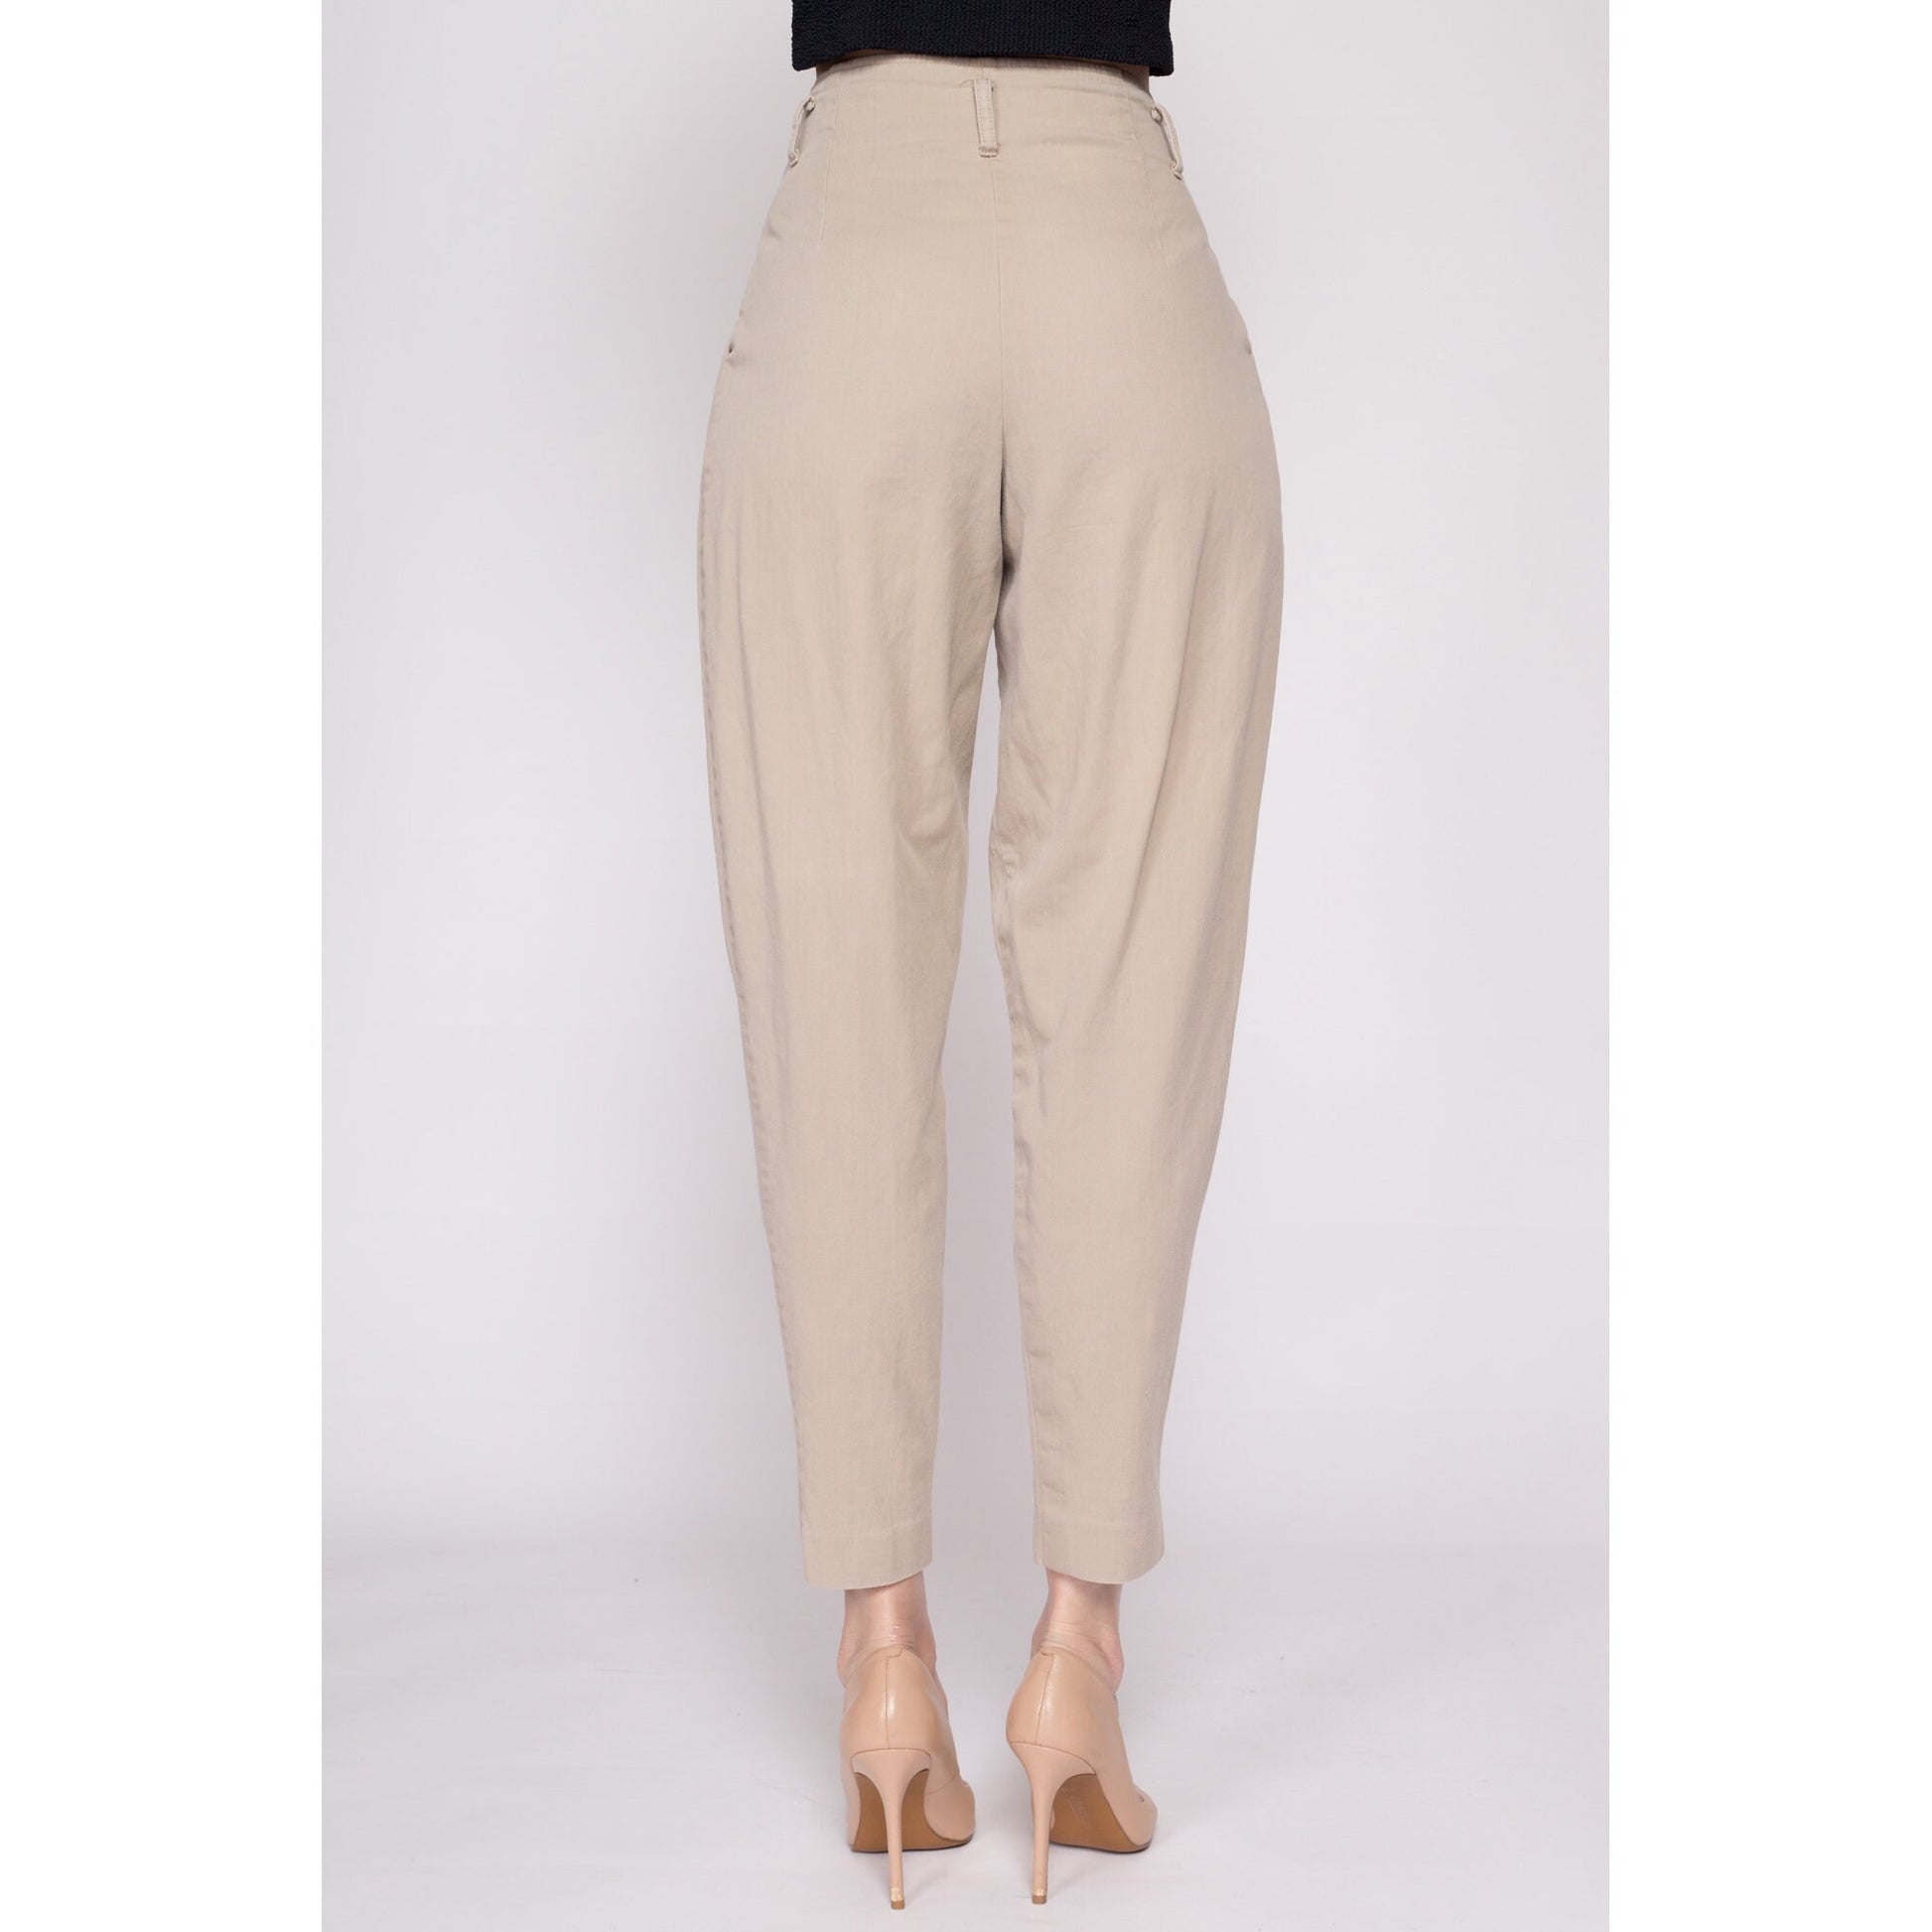 80s Khaki Cotton High Waisted Pants - Extra Small, 24.5 – Flying Apple  Vintage